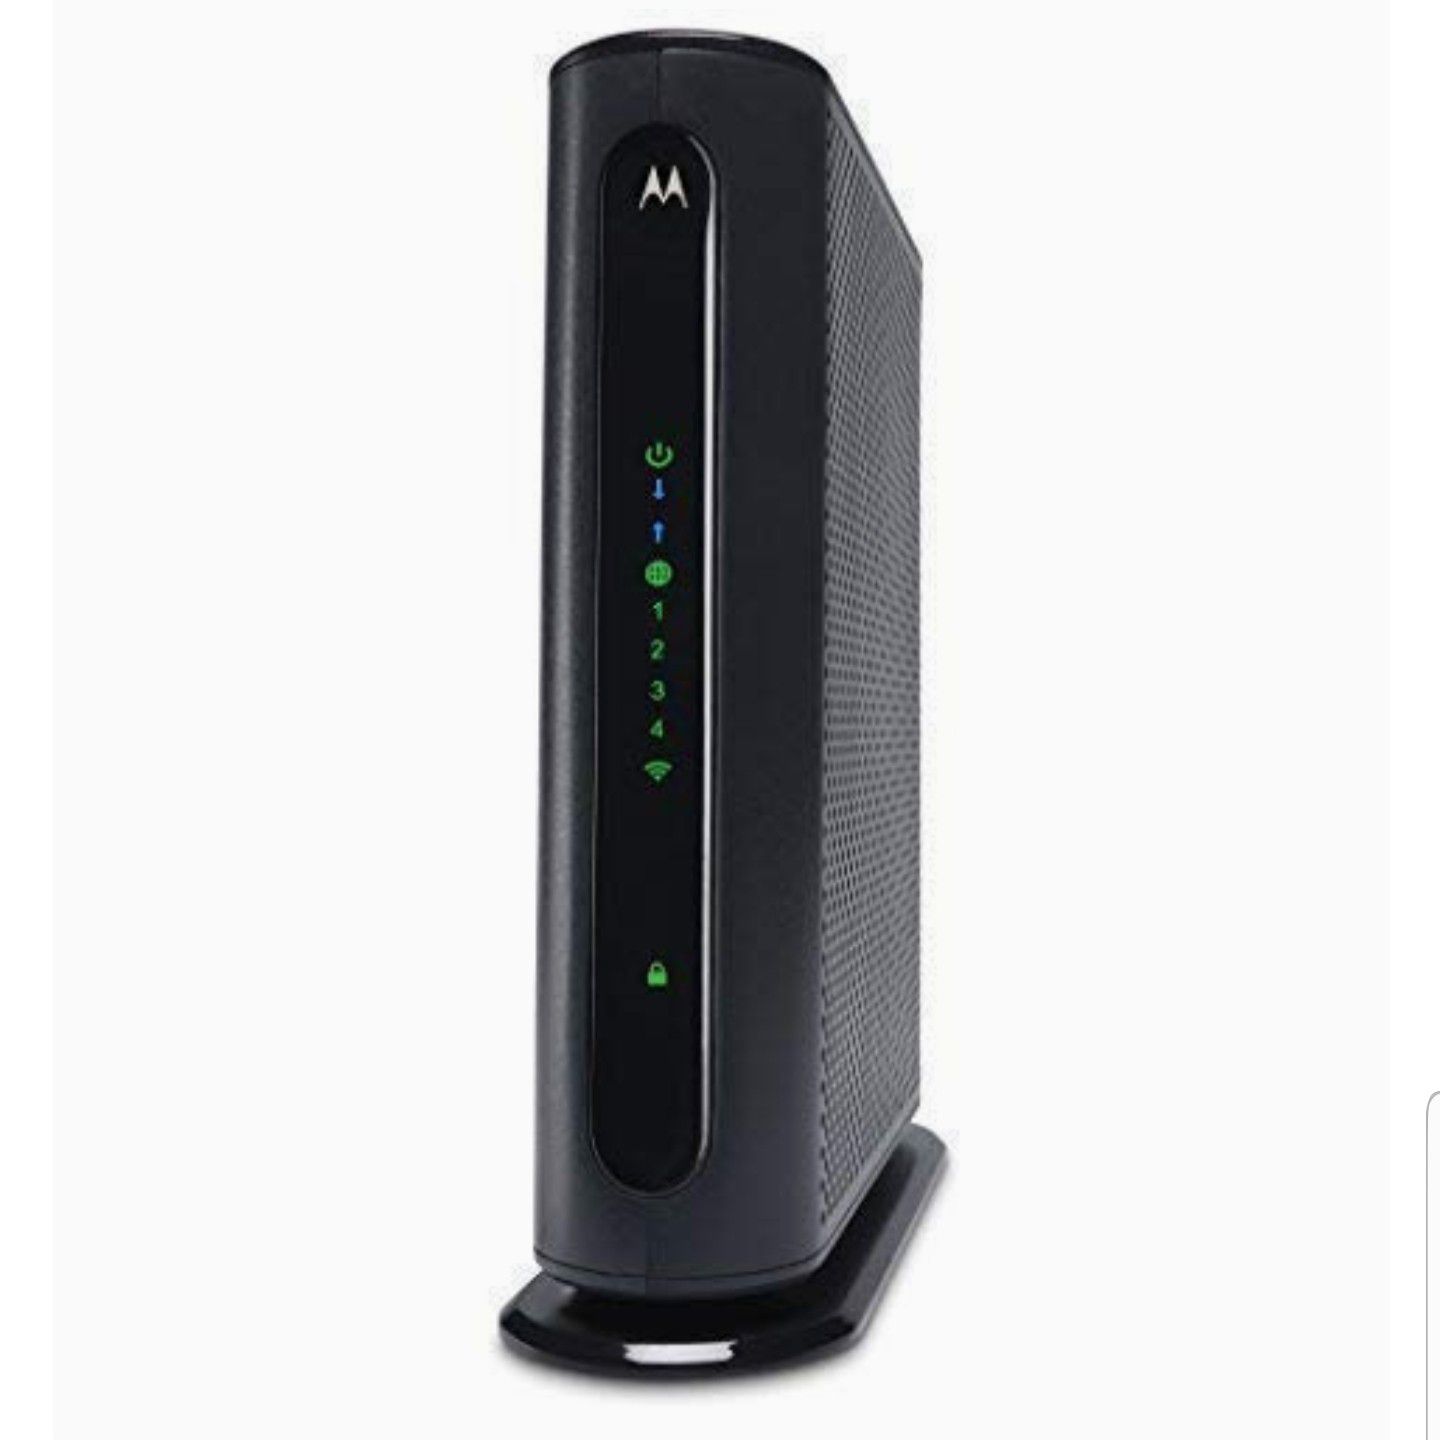 Motorola MG7310 Cable Modem and Wi-Fi Router